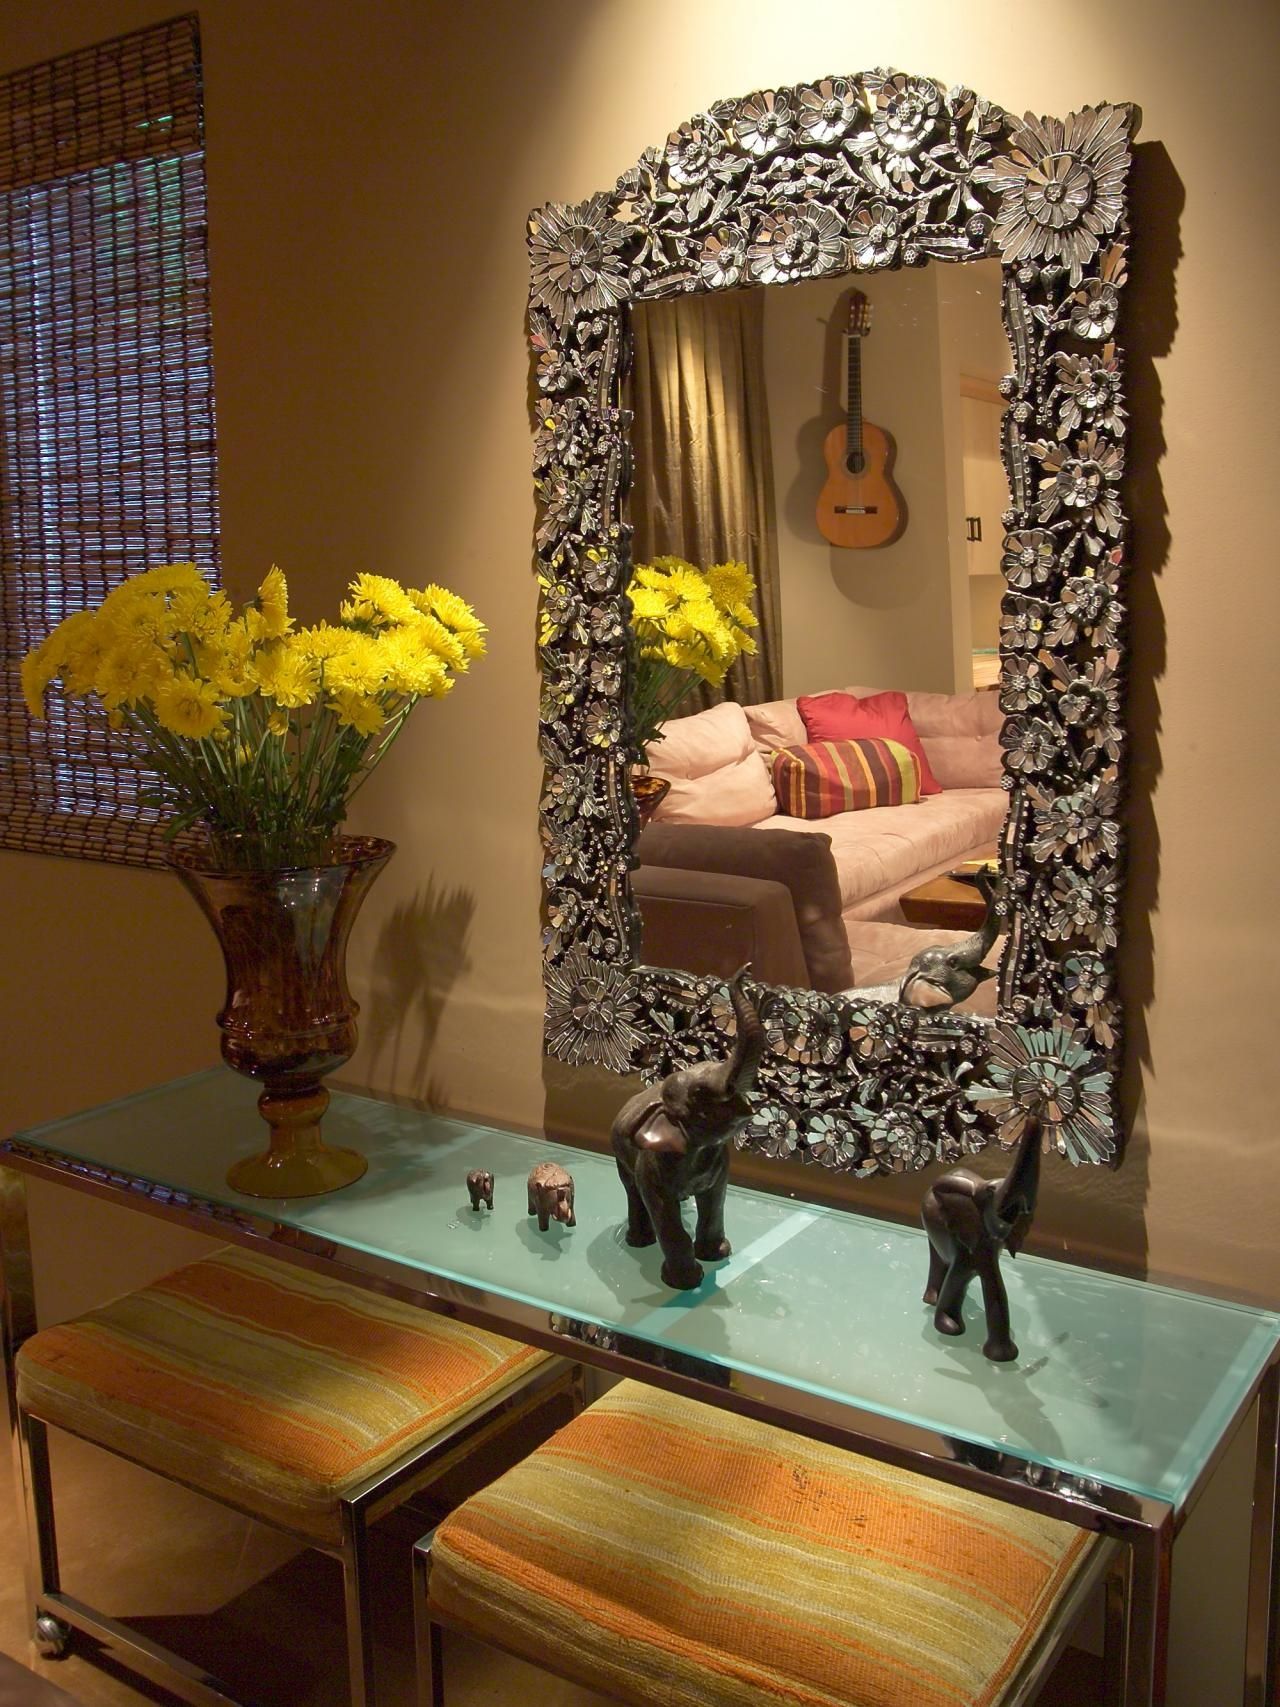 Photo Page Hgtv Within Decorative Table Mirrors (View 14 of 15)